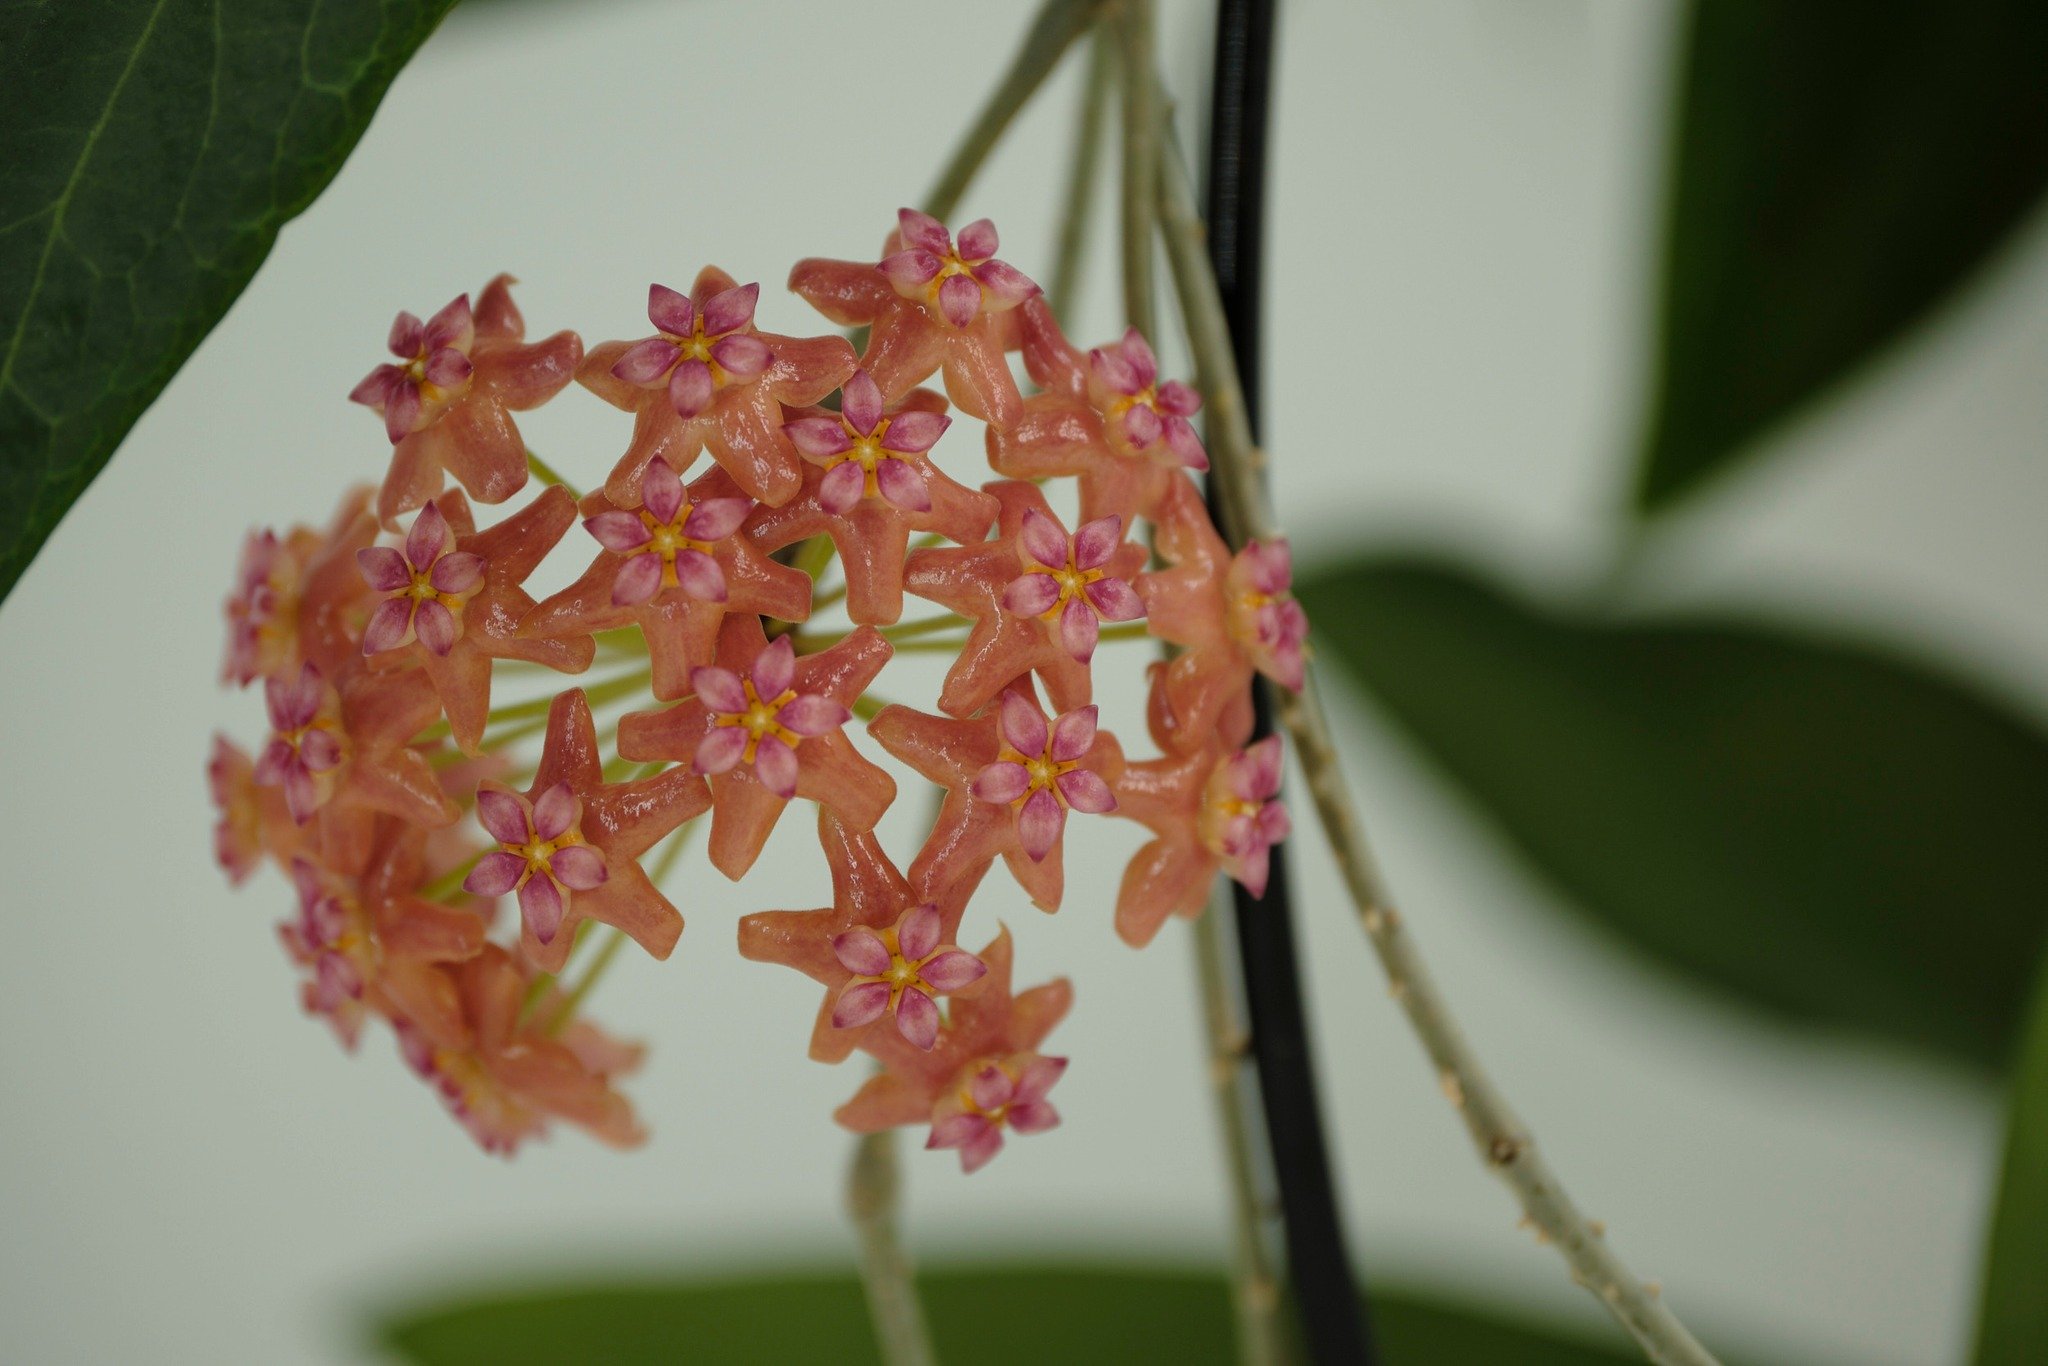 Hello hoya family!

It's amazing that it's mid April and we're still seeing so many wonderful blooms. This week we saw Hoya bordenii come out with this stunner!

Bordenii is a very nice hoya native to the Philippines. Its leaves are hard-ish with cle